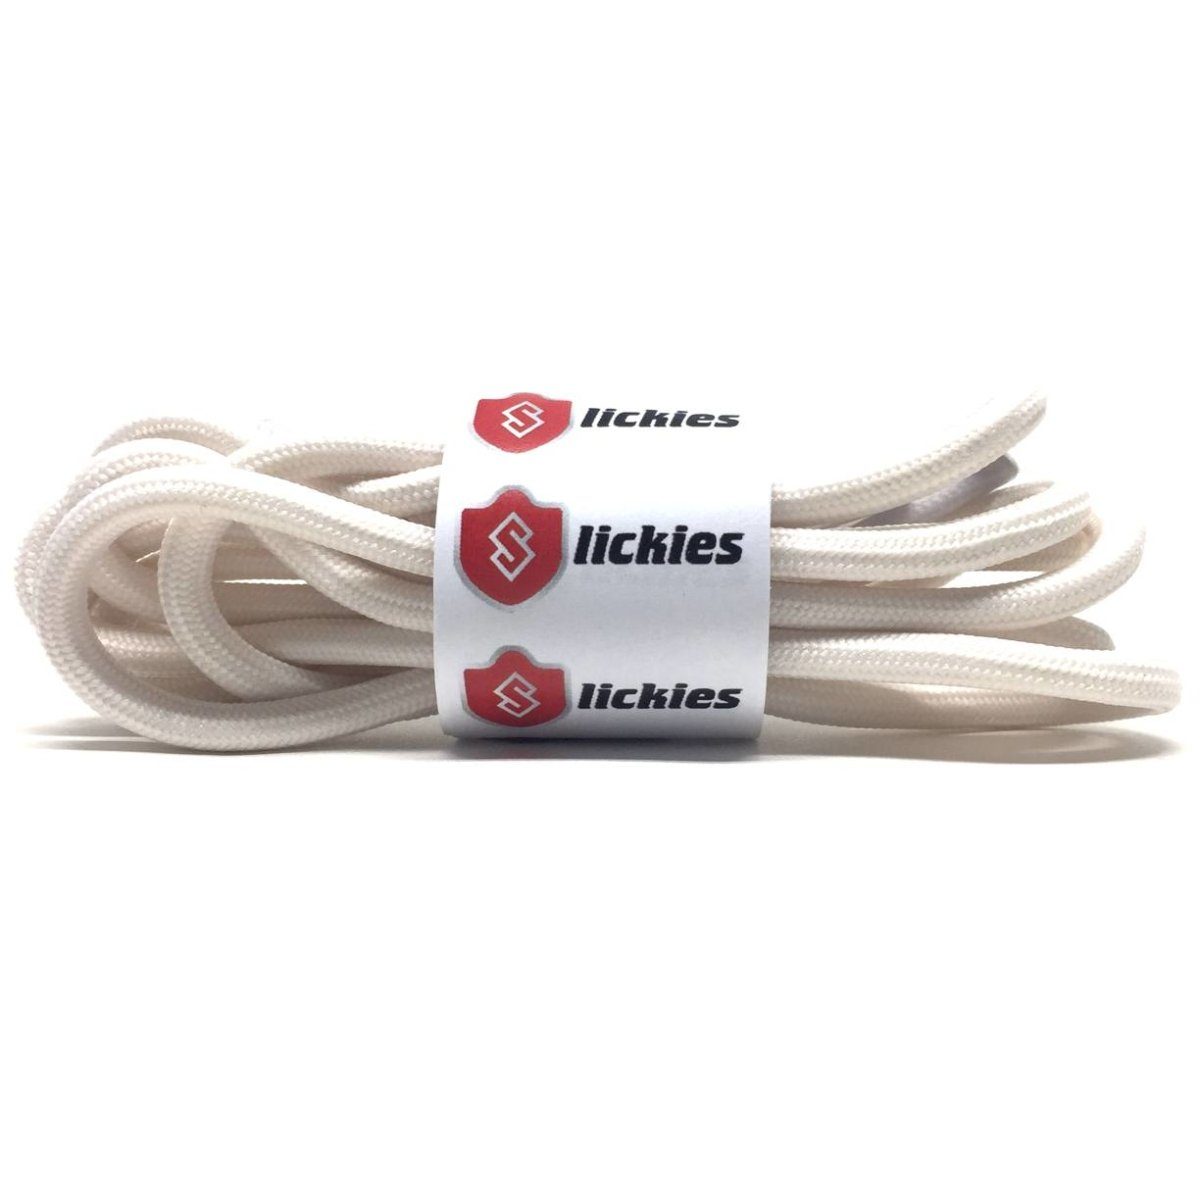  hoodlaces Brand 3M Replacement Hoodie String